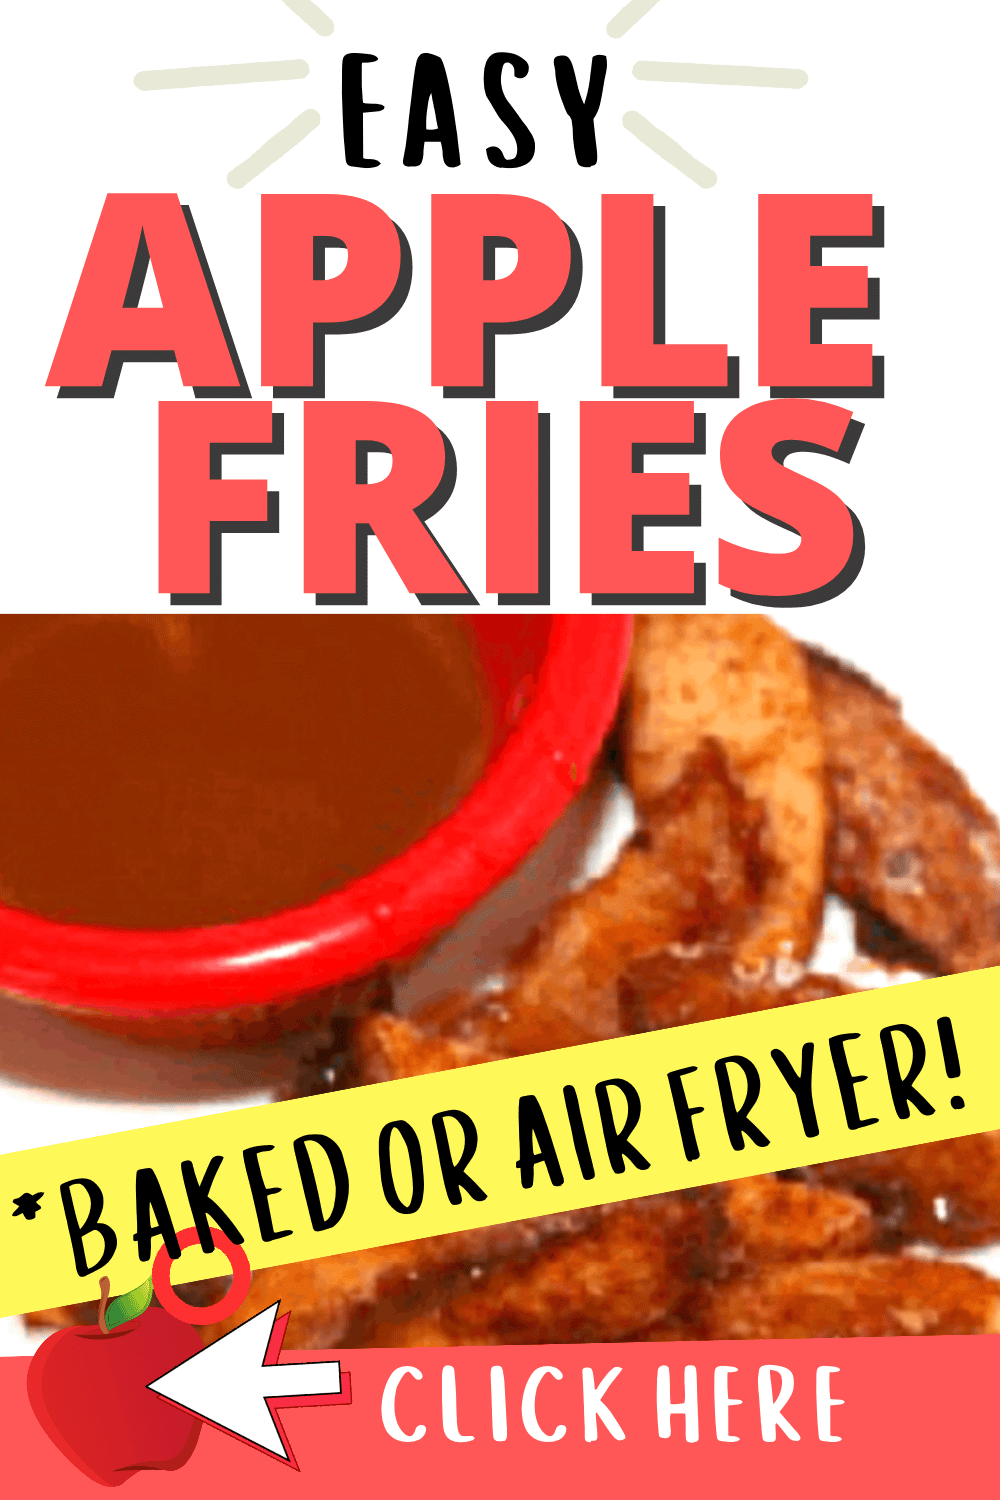 APPLE STICKS AIR FRYER OR BAKED (apple fries recipe baked and air fried) - one of our favorite apple snack recipes! text over images of baked apples sticks